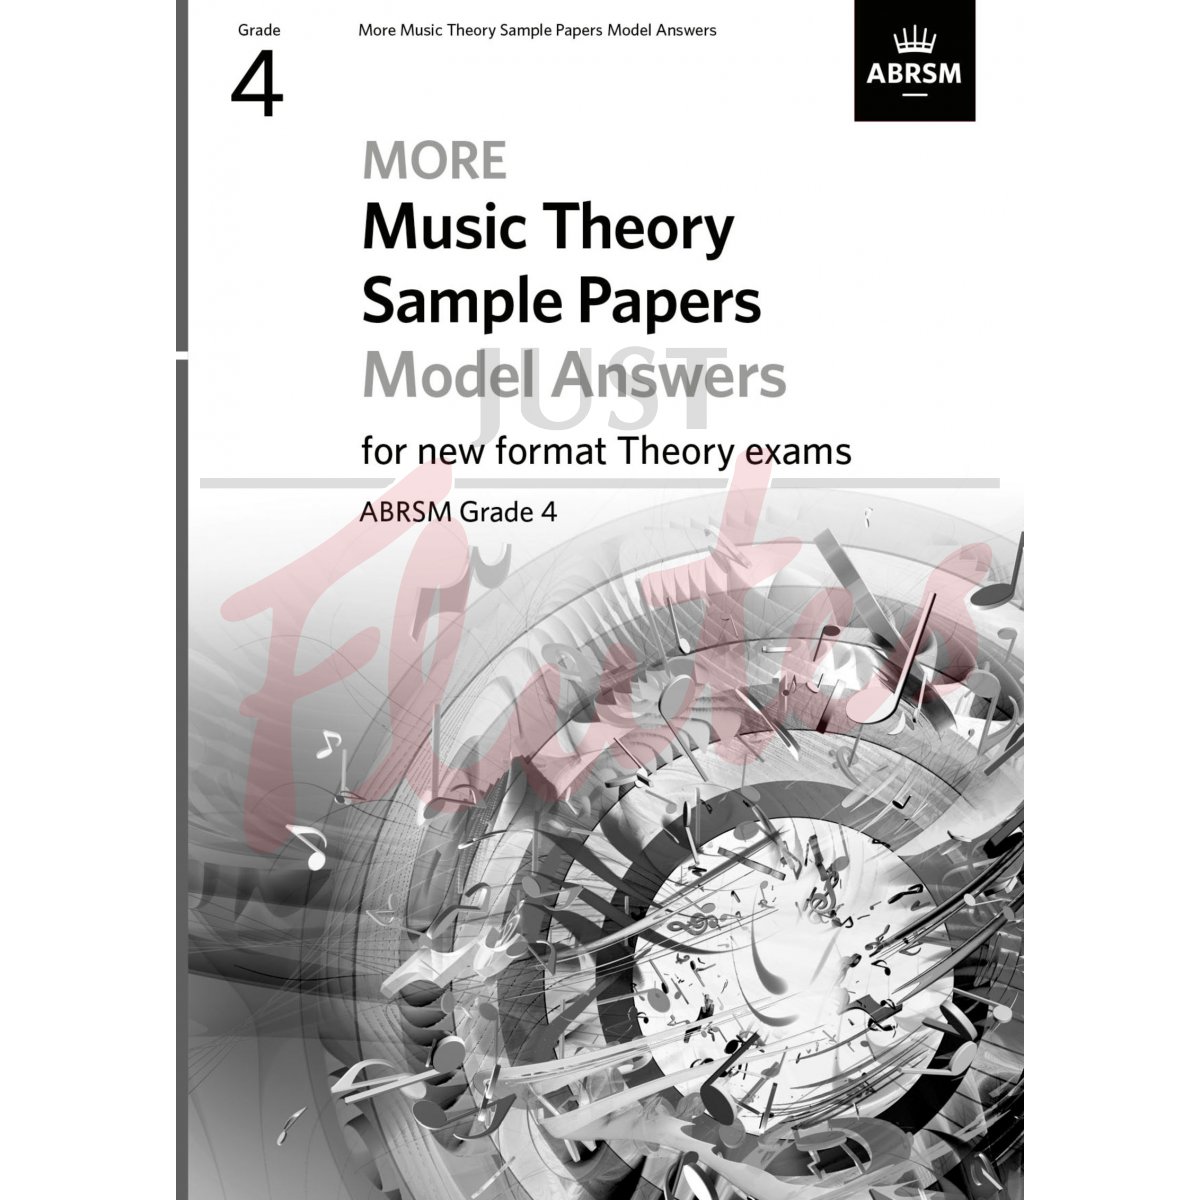 More Music Theory Sample Papers Grade 4 Model Answers